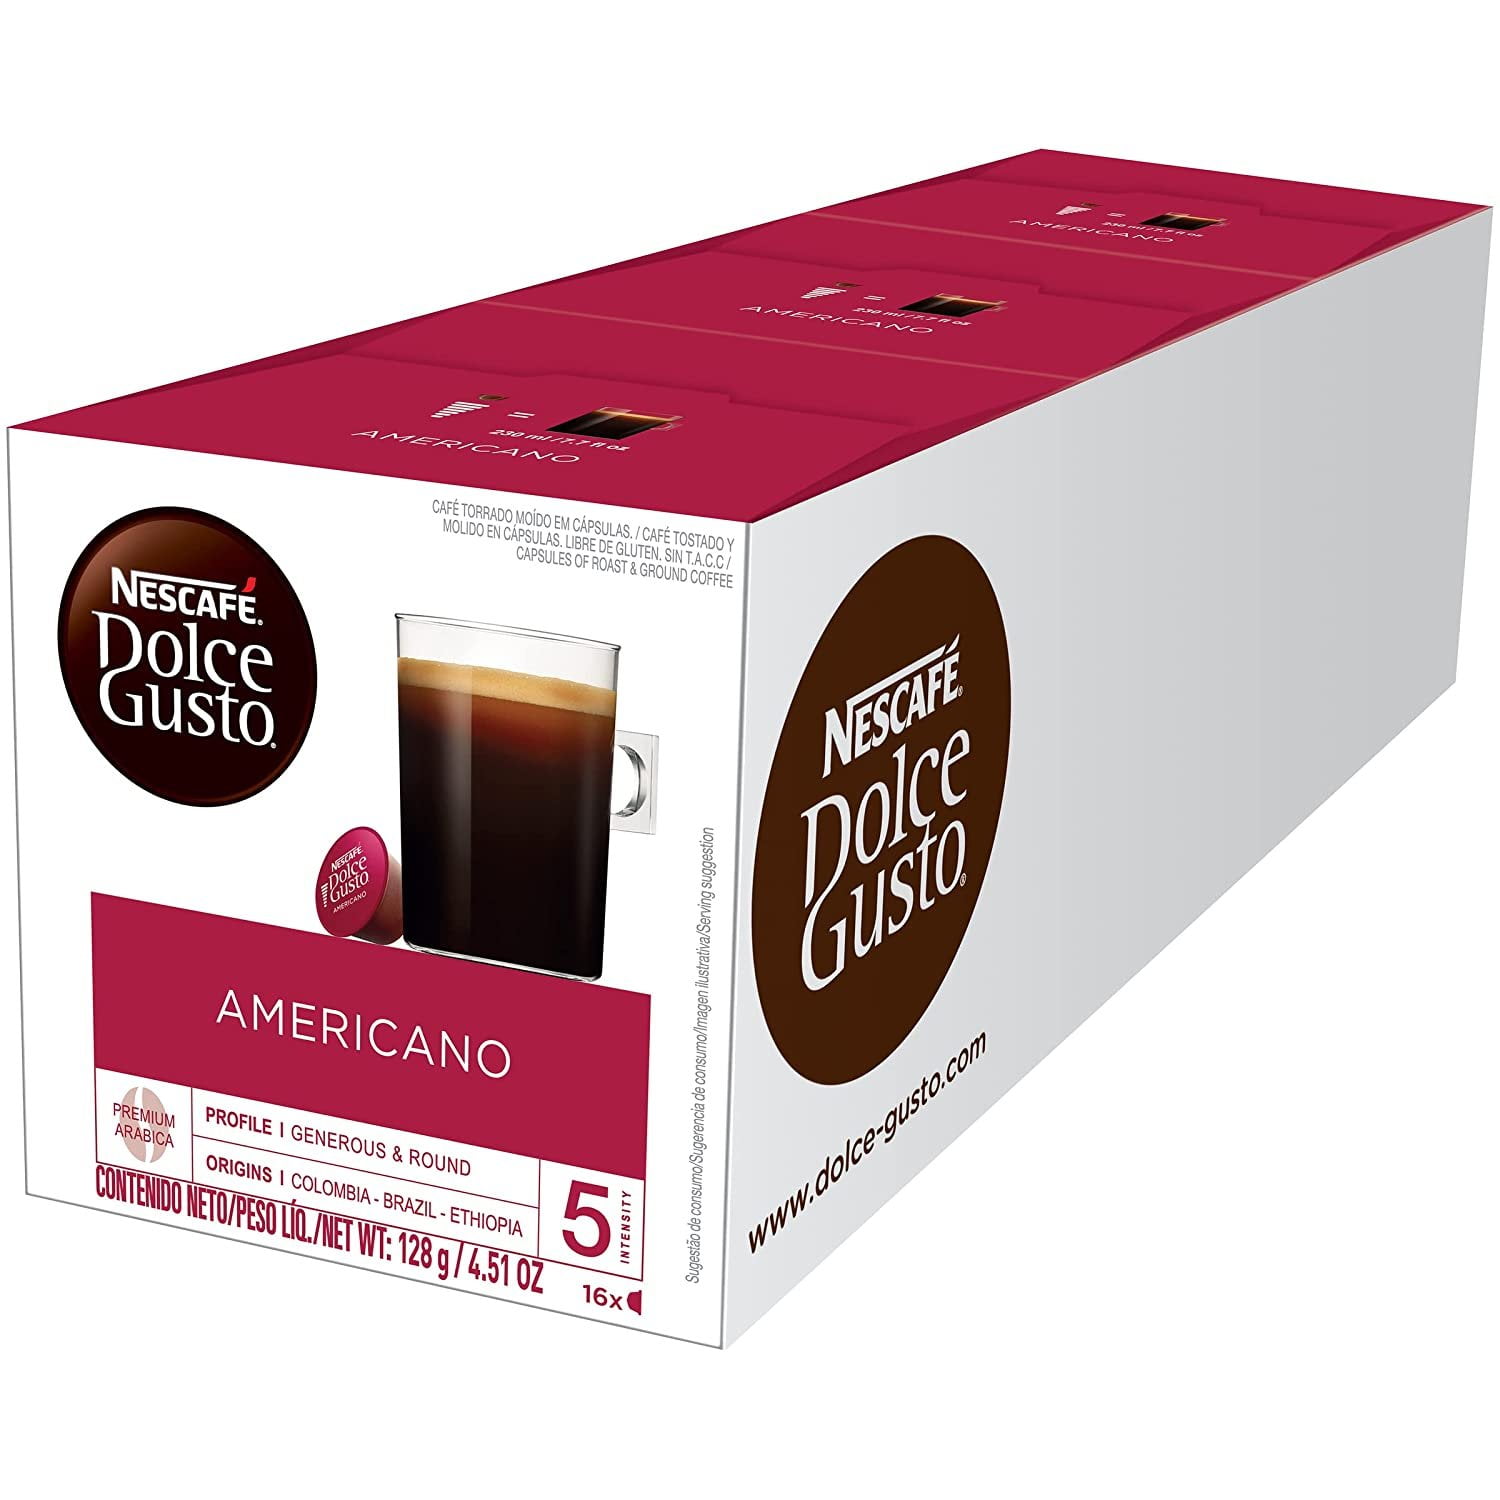 Nescafé Dolce Gusto Cappuccino Milk Coffee Capsule 16caps/186,4g delivery  from Foodora Market Oulu in